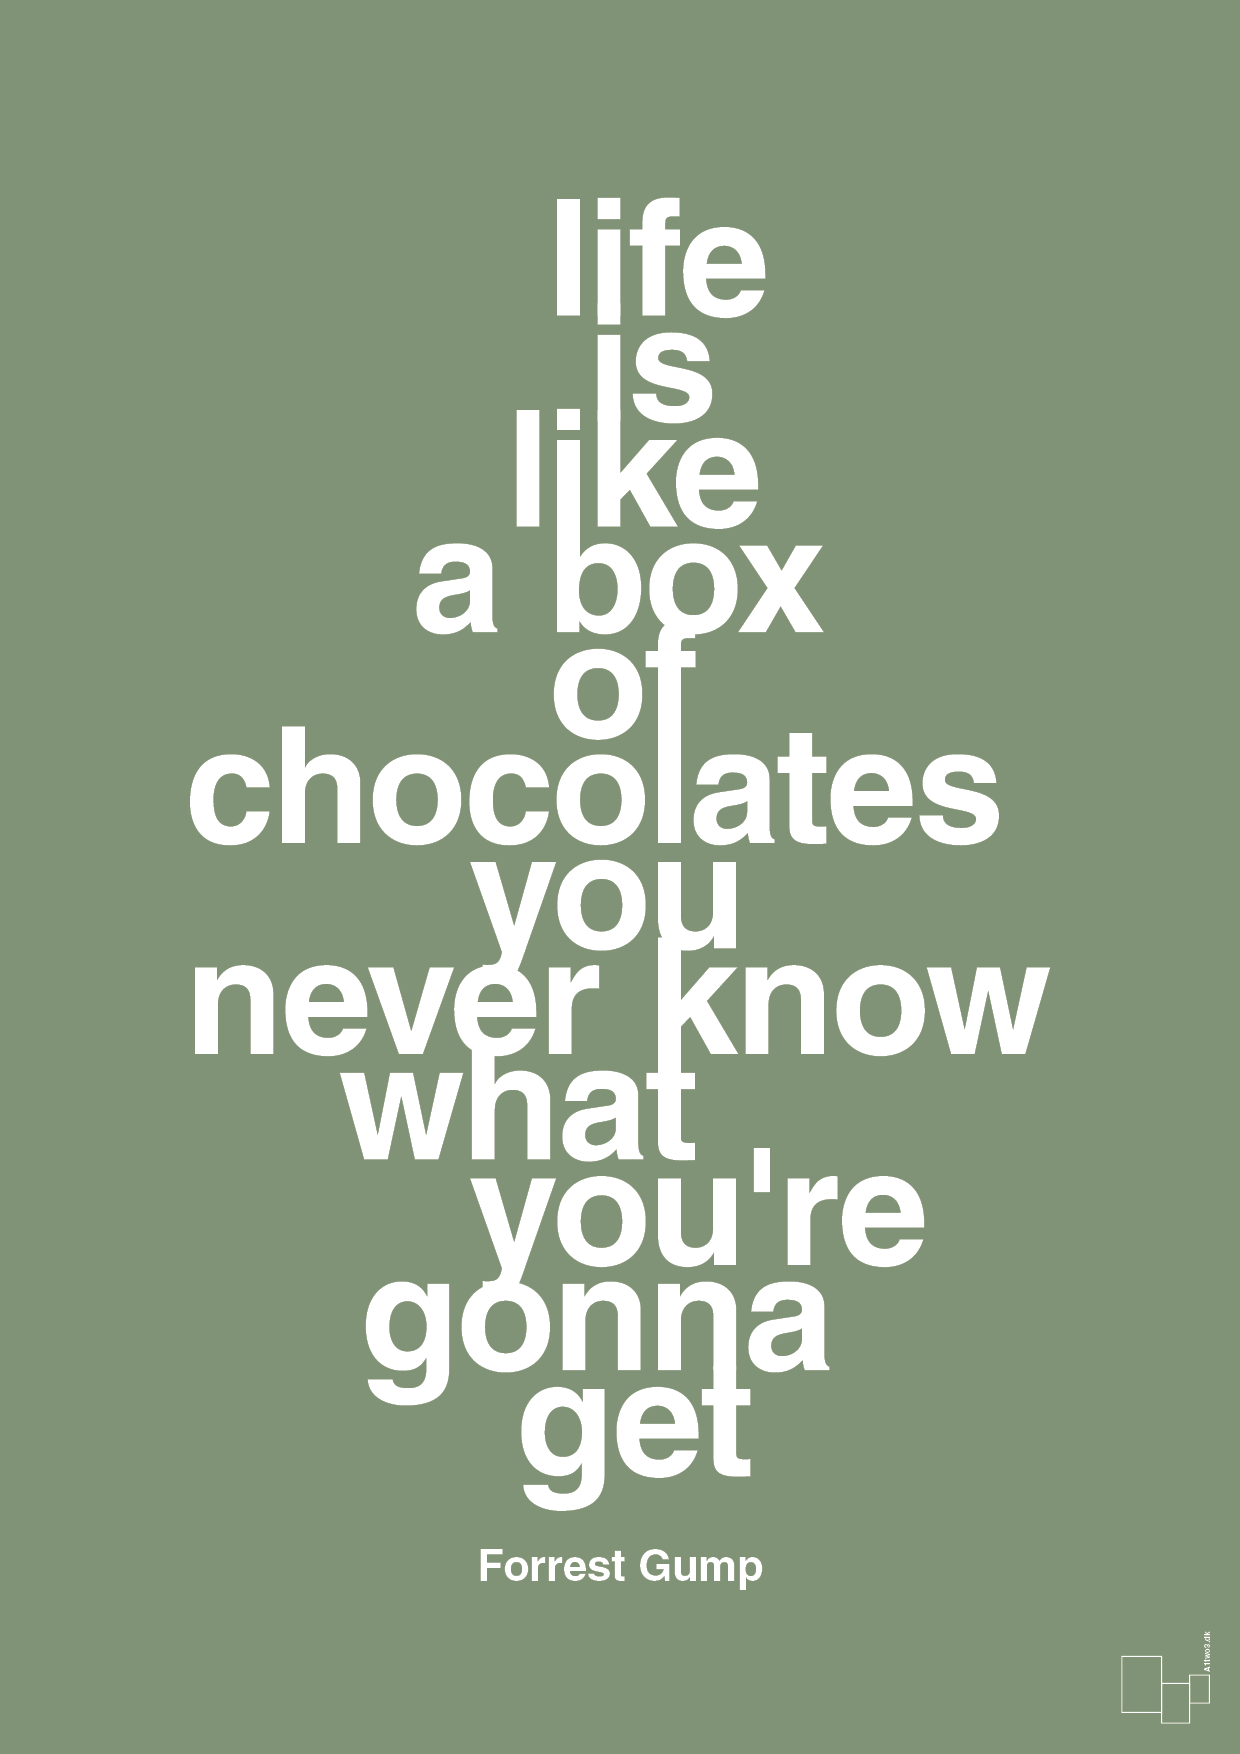 life is like a box of chocolates you never know what you're gonna get - Plakat med Citater i Jade